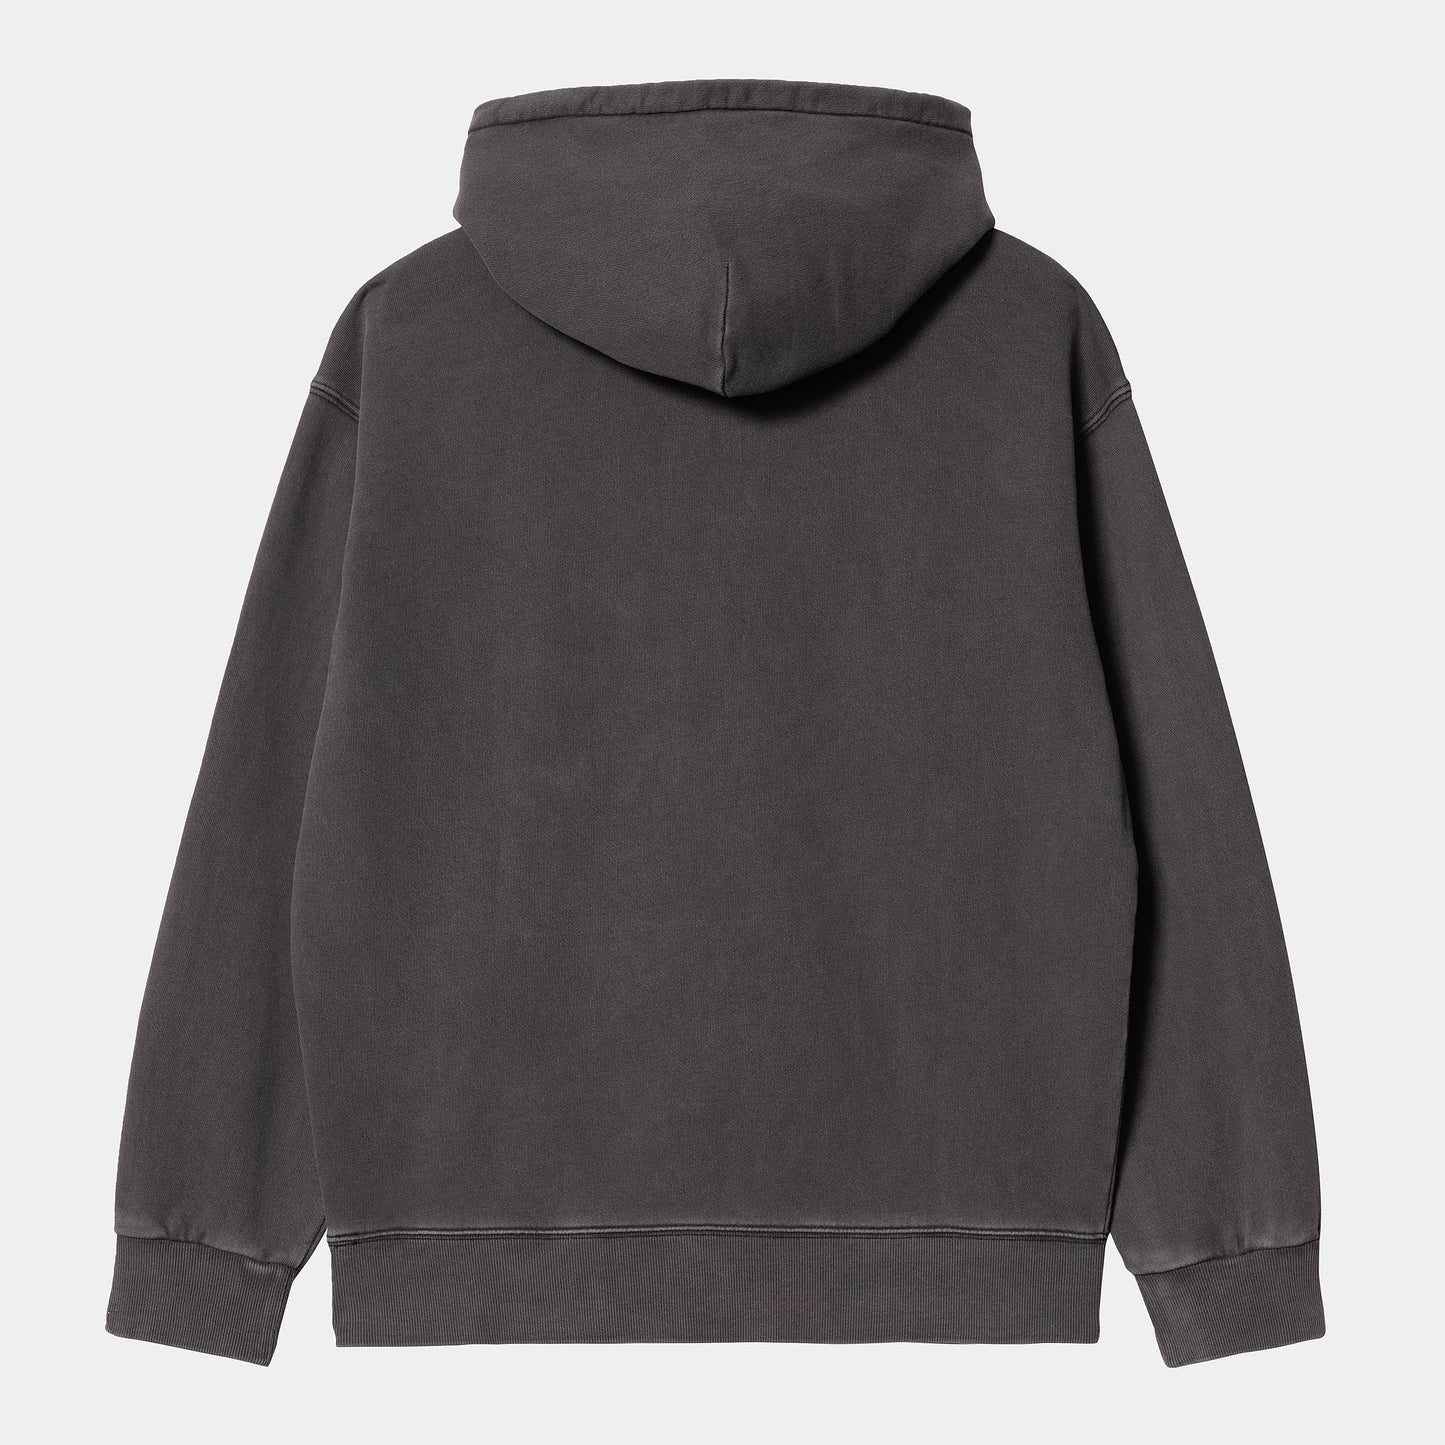 Carhartt WIP Nelson Hooded Sweater Charcoal Garment Dyed